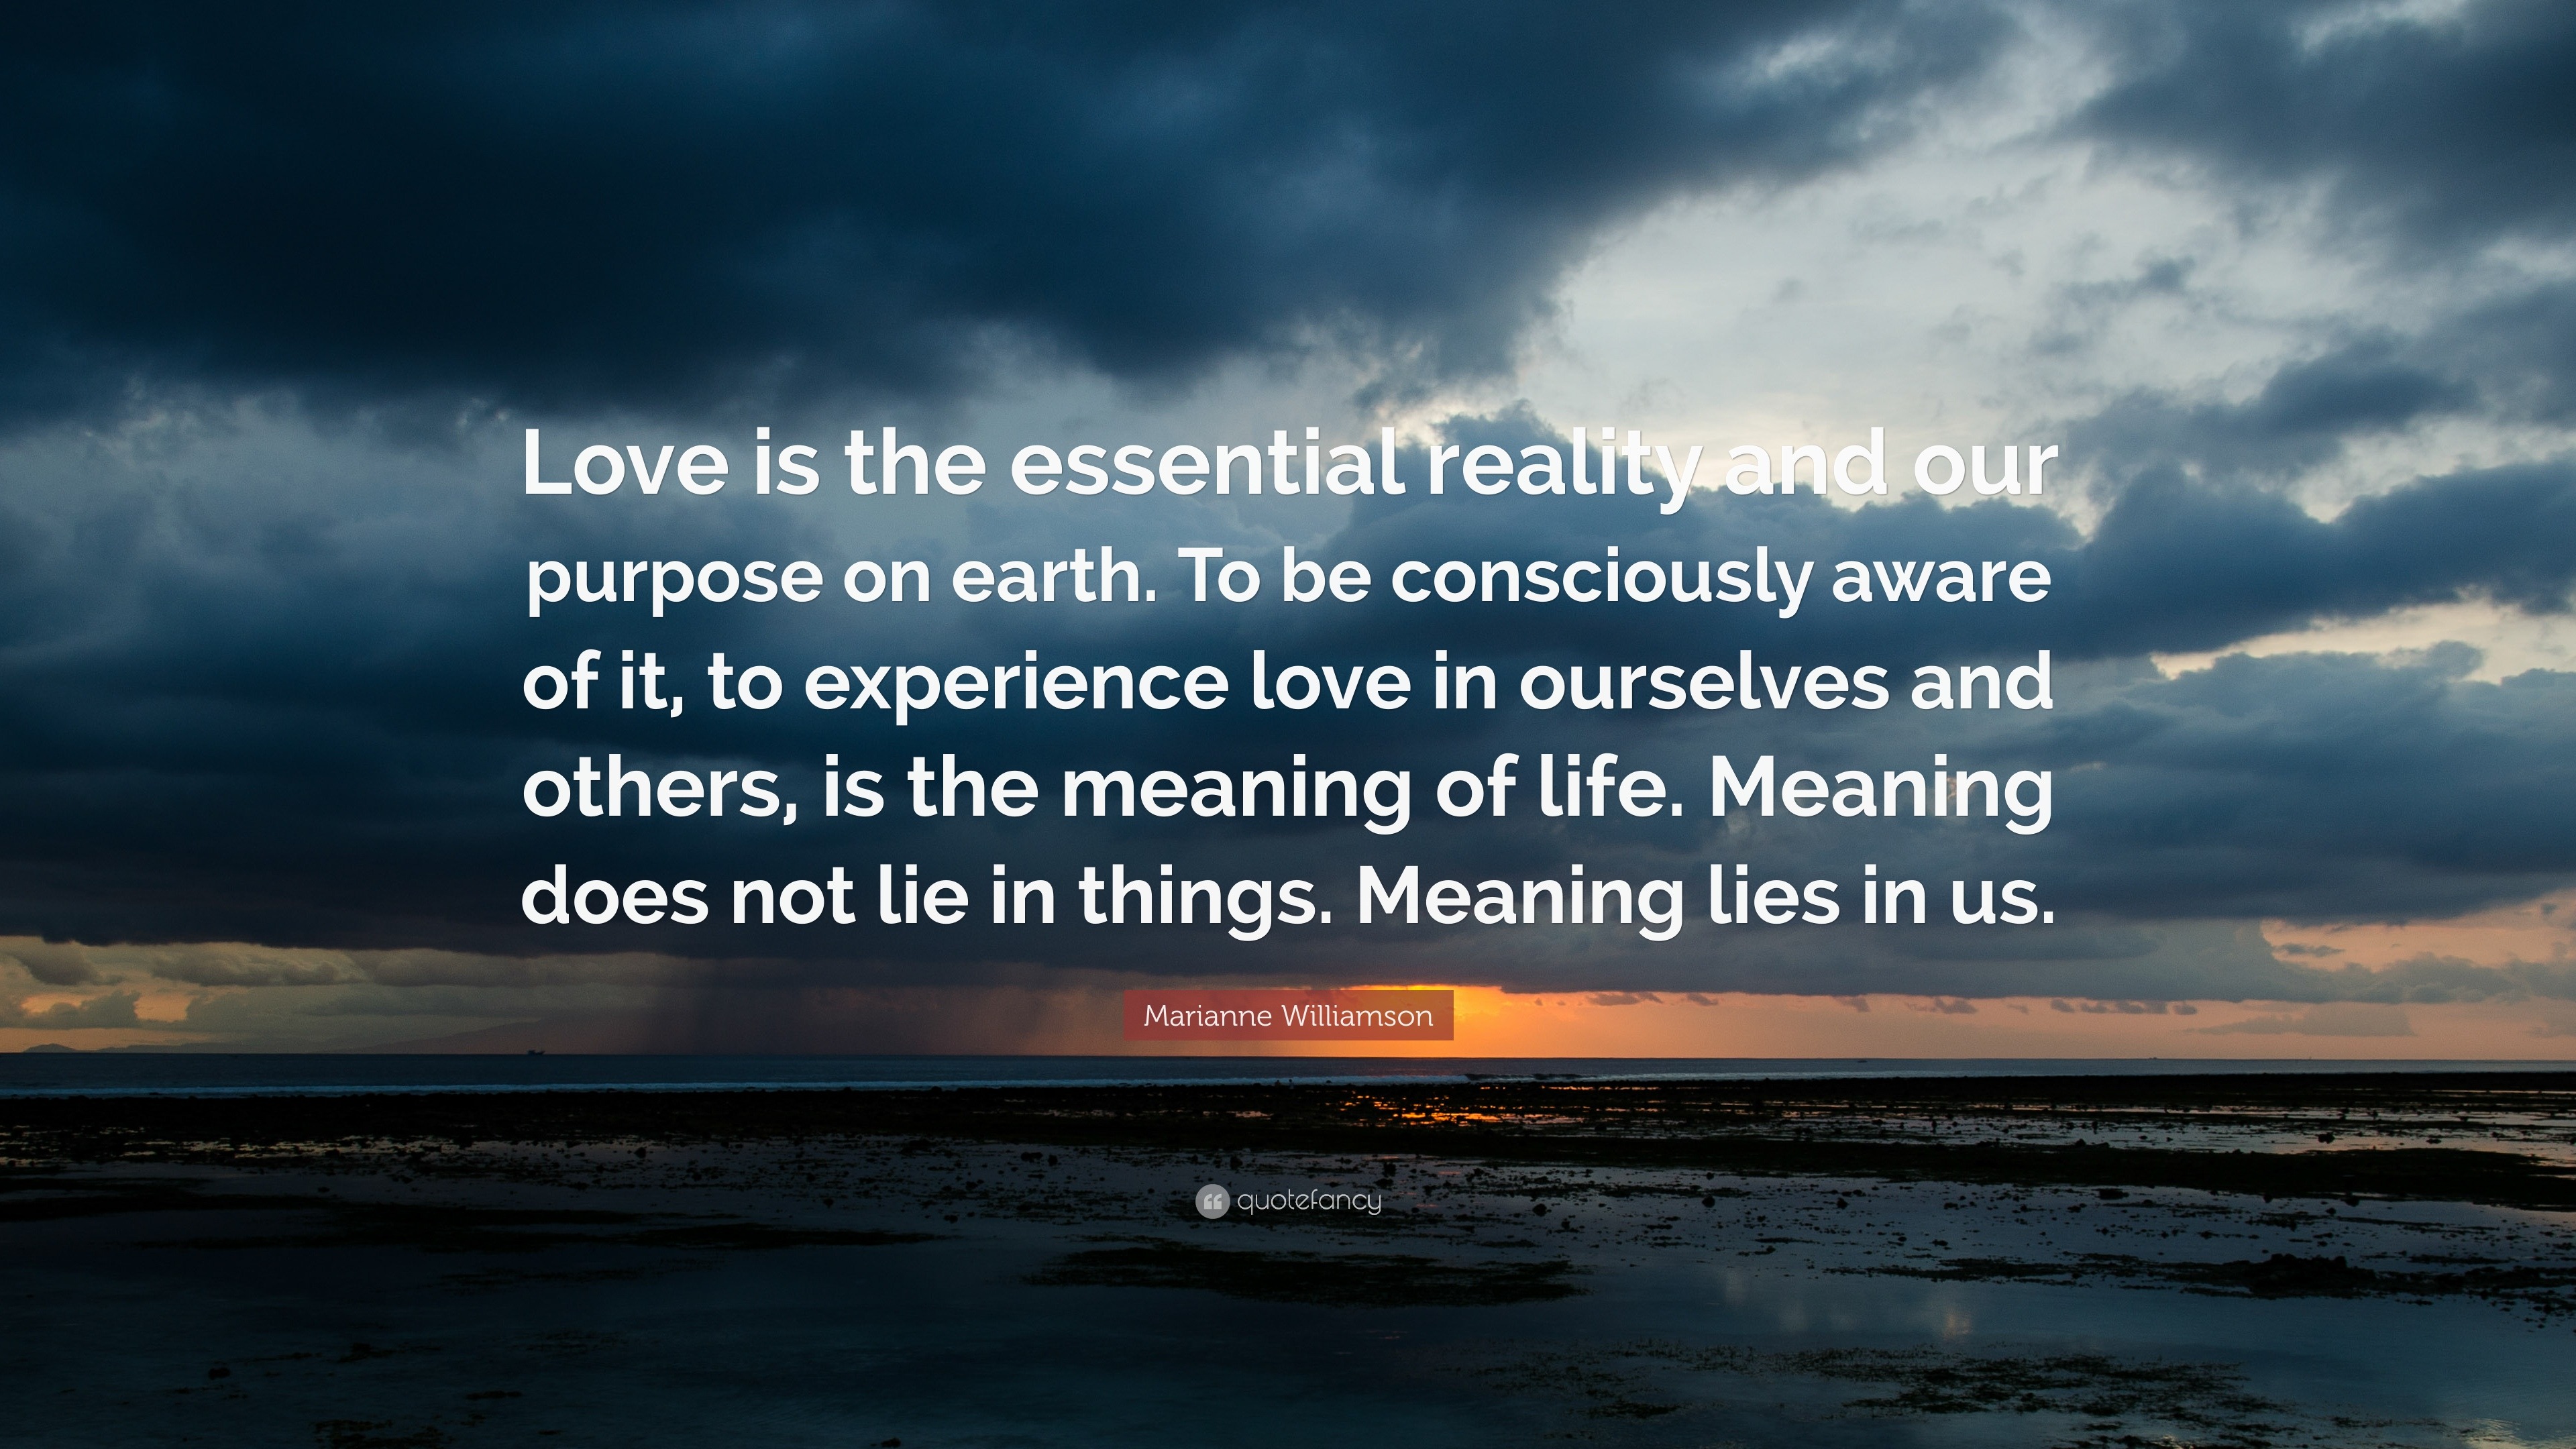 Marianne Williamson Quote “Love is the essential reality and our purpose on earth